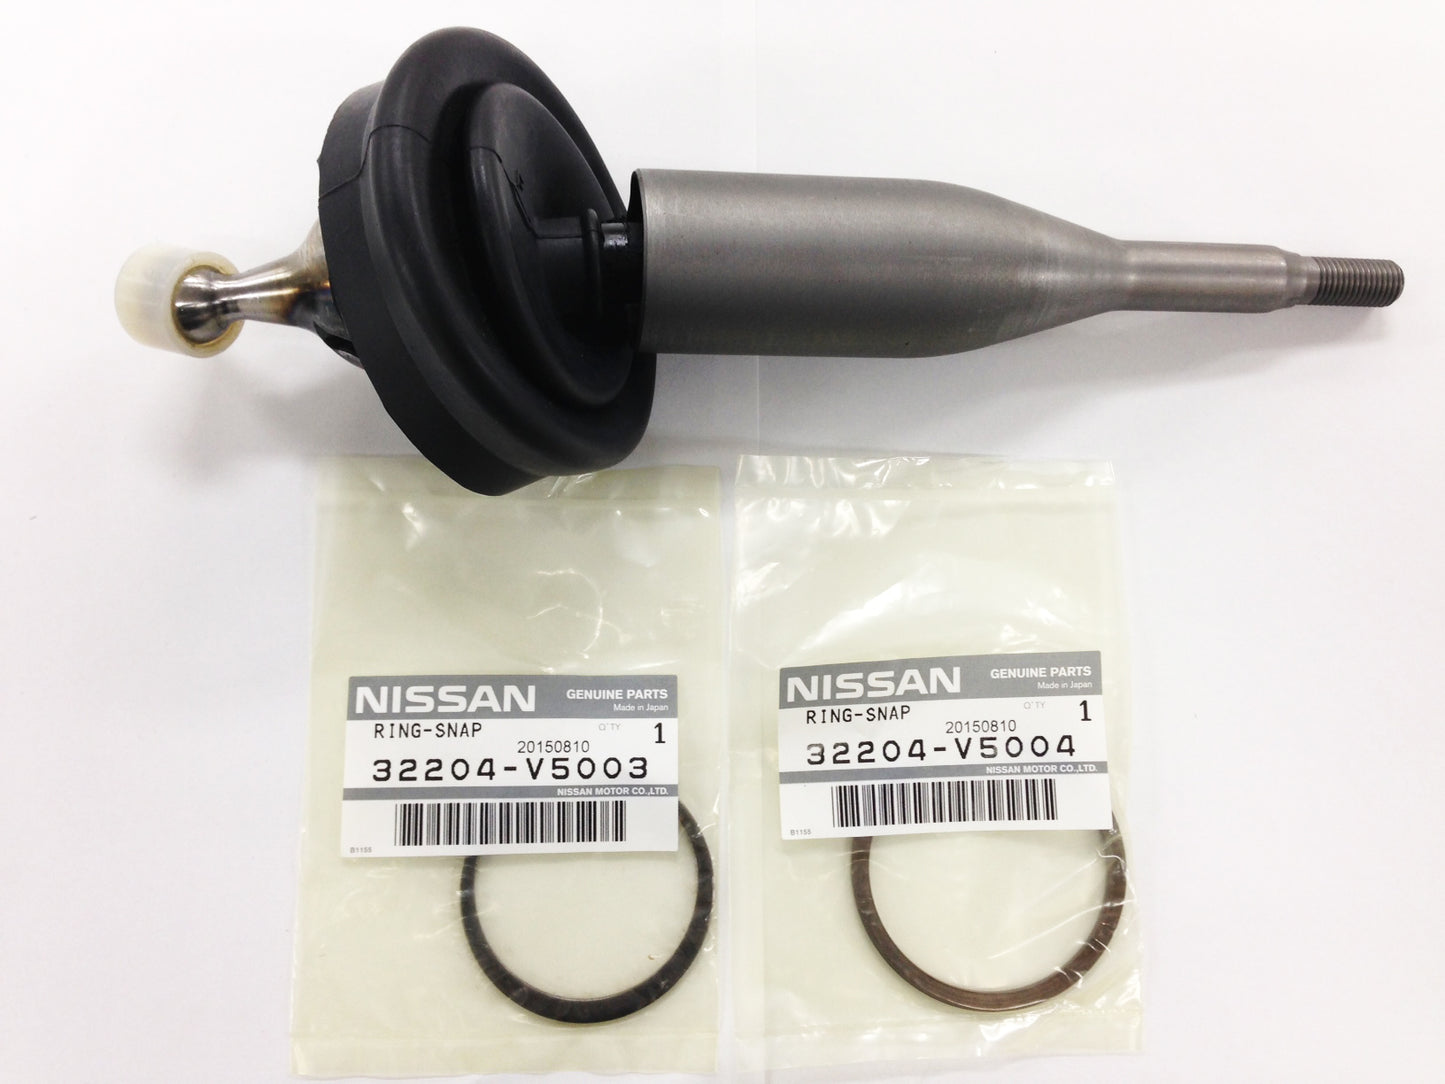 NISSAN Shift Lever with Circlip - BNR32